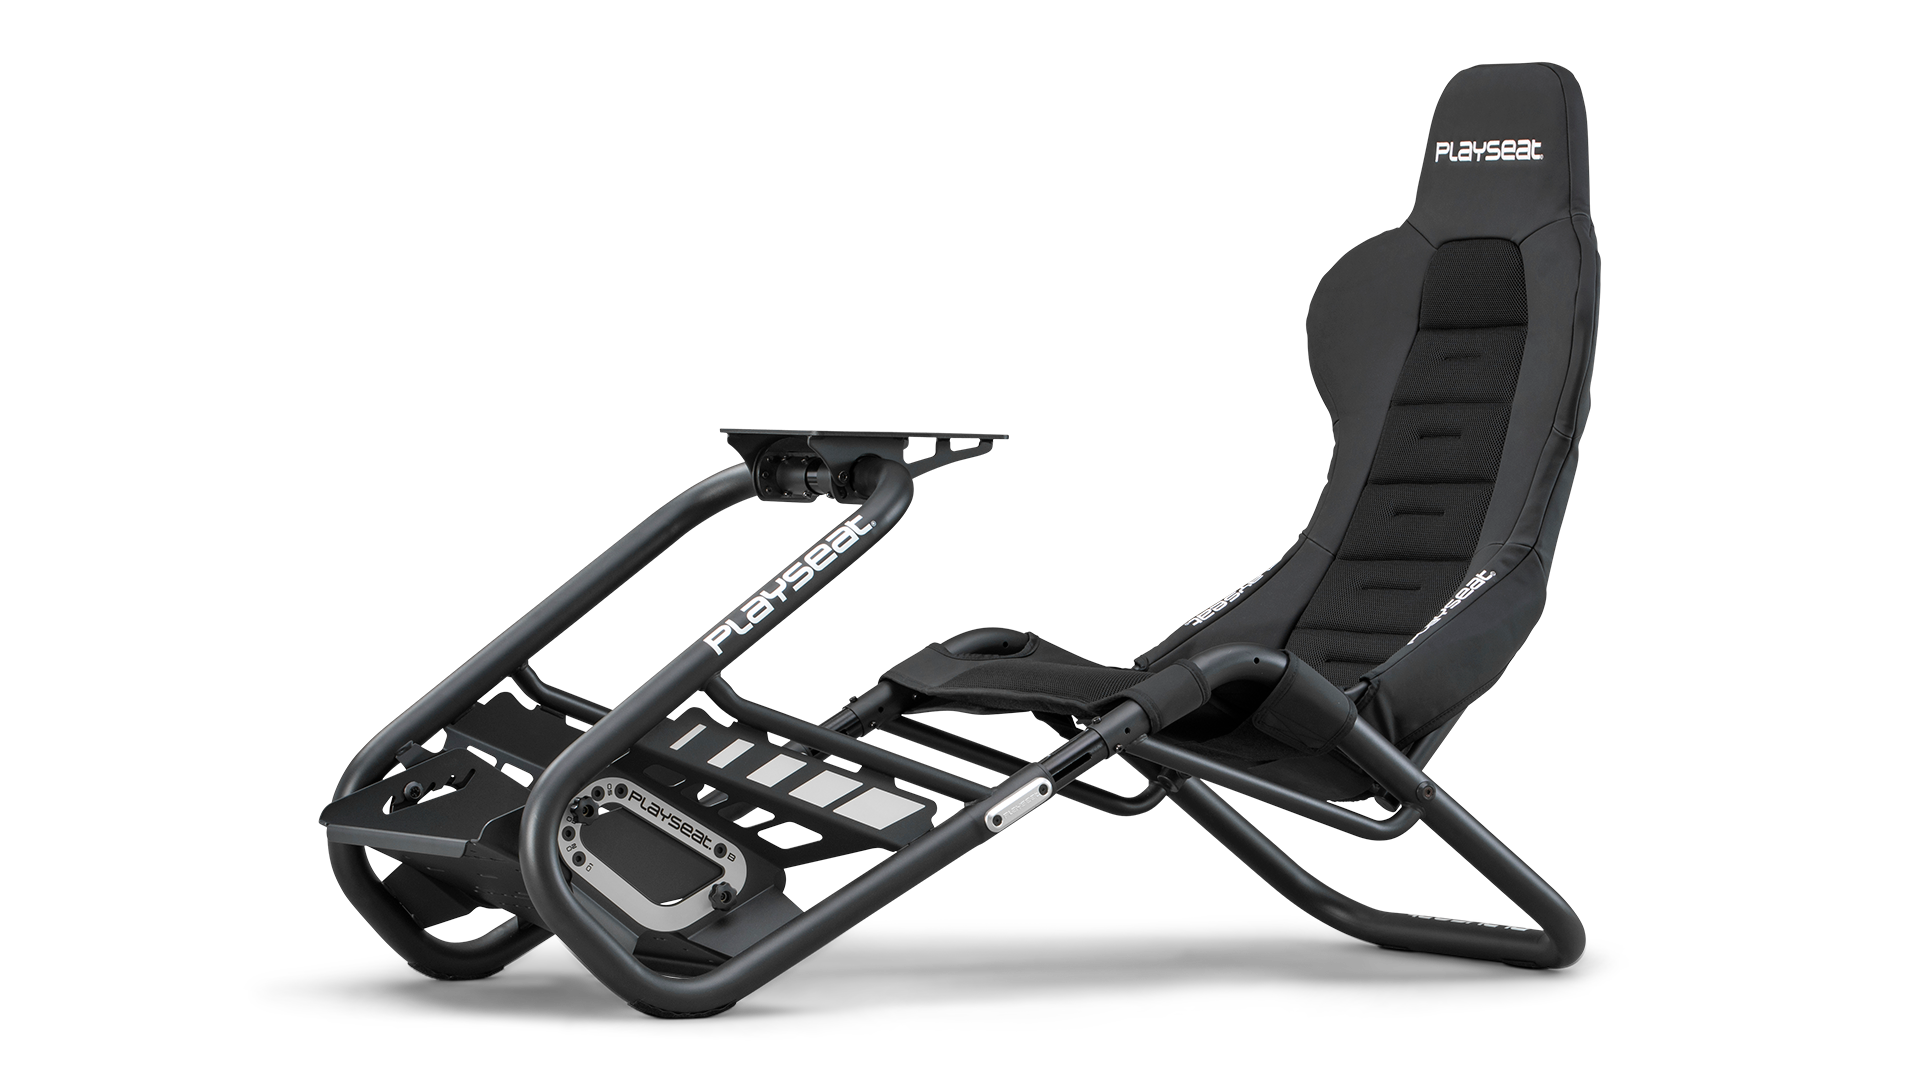 playseat-trophy-black-direct-drive-simulator-front-angle-view-1920x1080-6.png